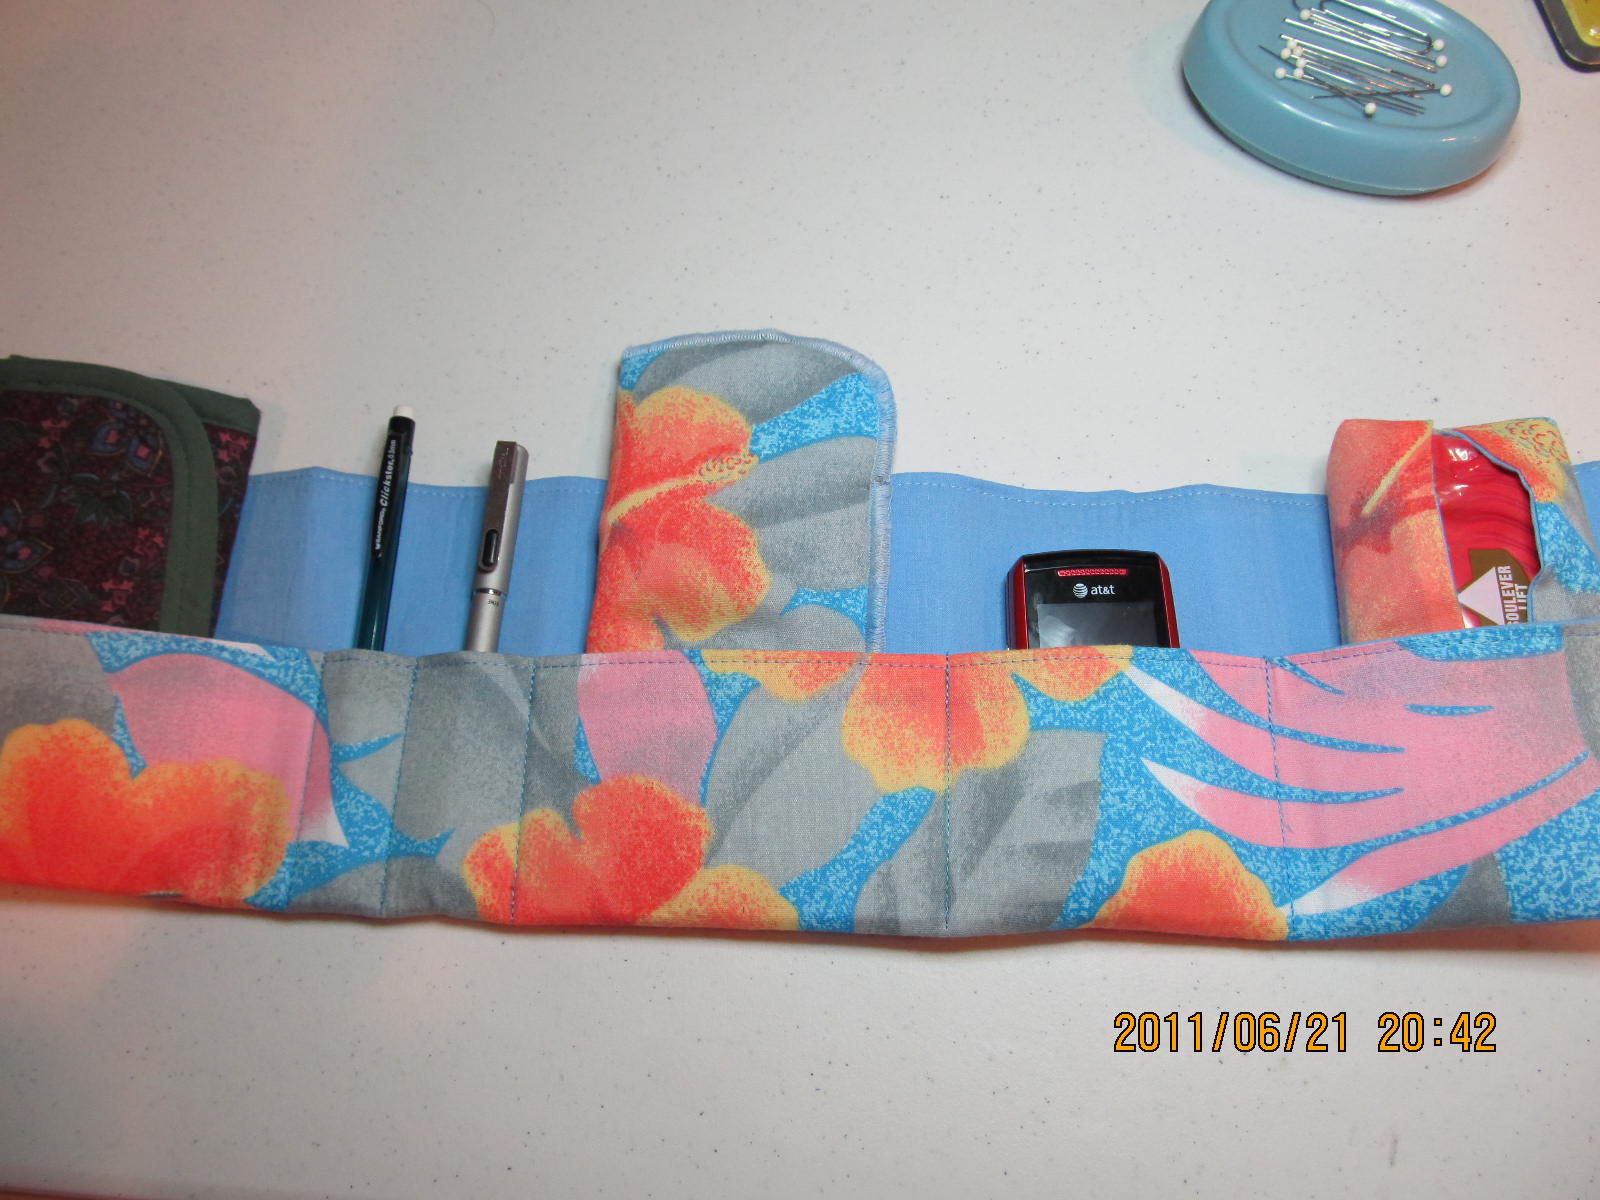 Sewing Sandy: Purse Accessories and Organizer